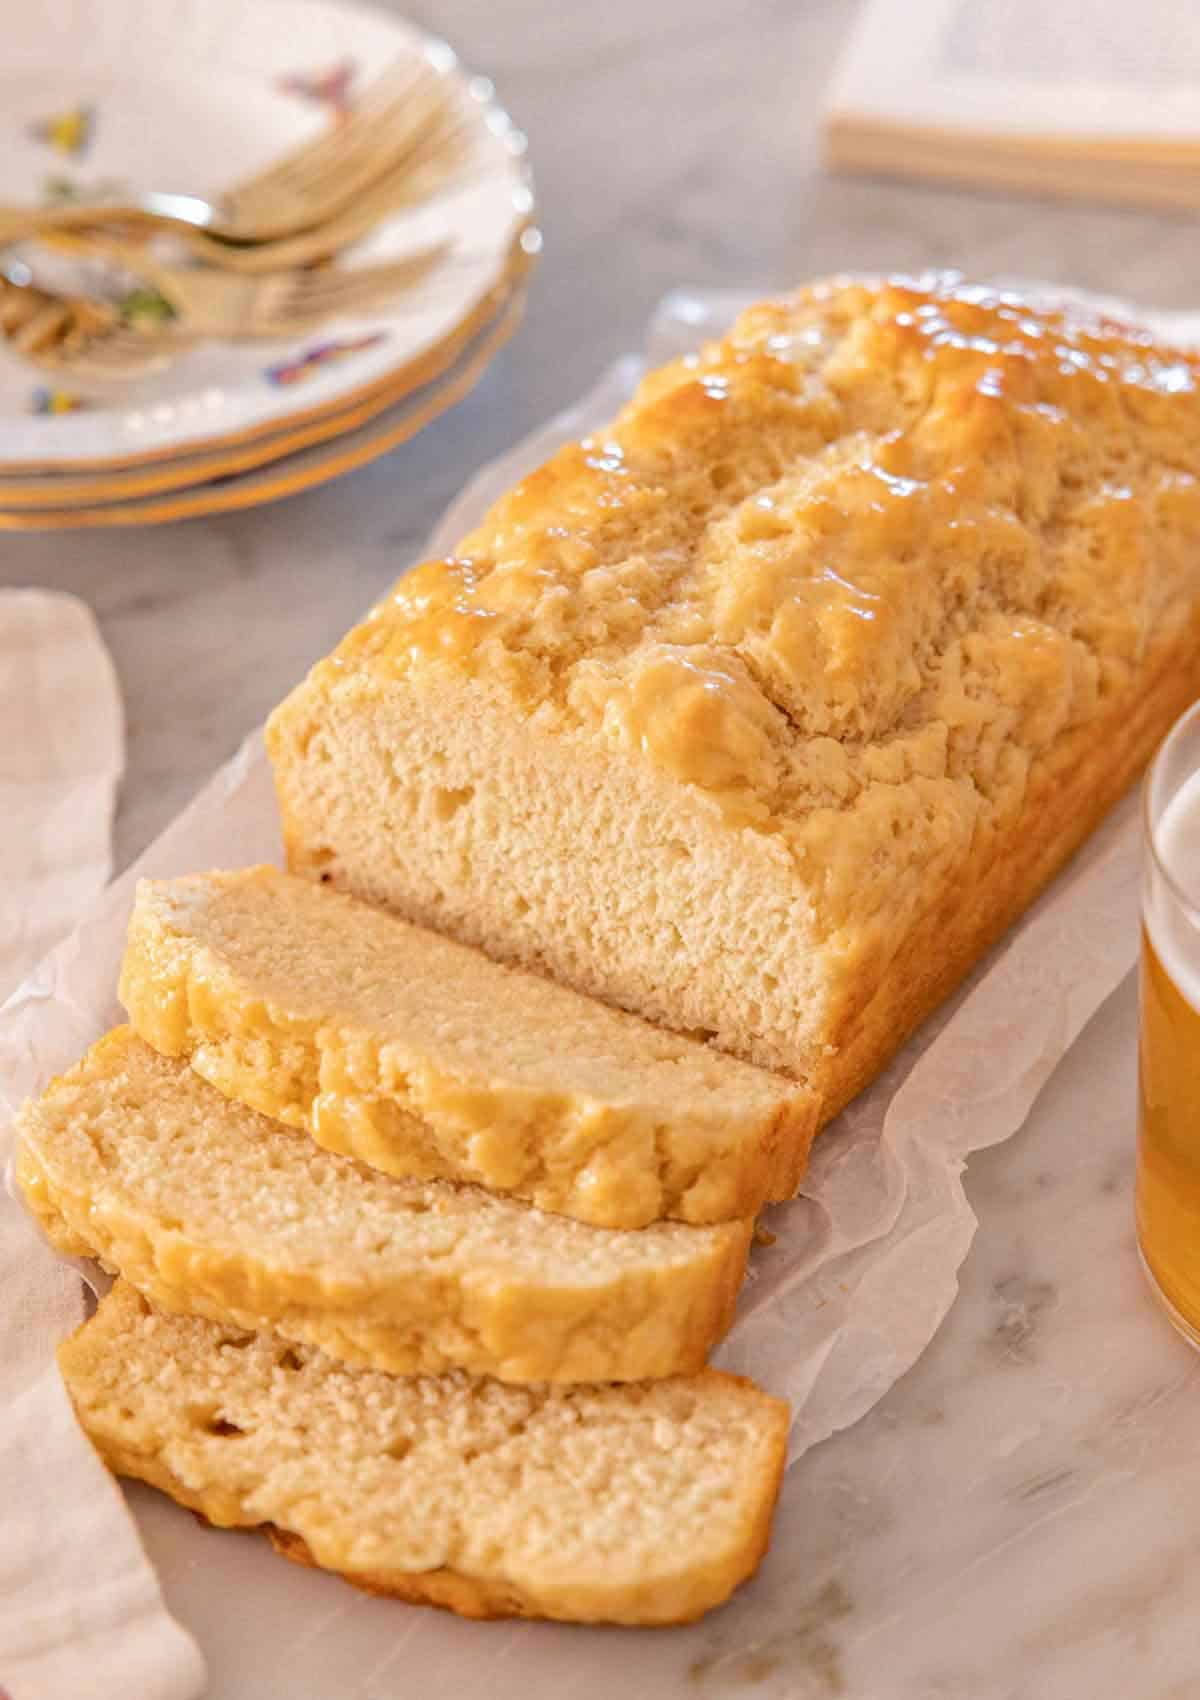 A loaf of beer bread with three slices cut in front of the loaf.